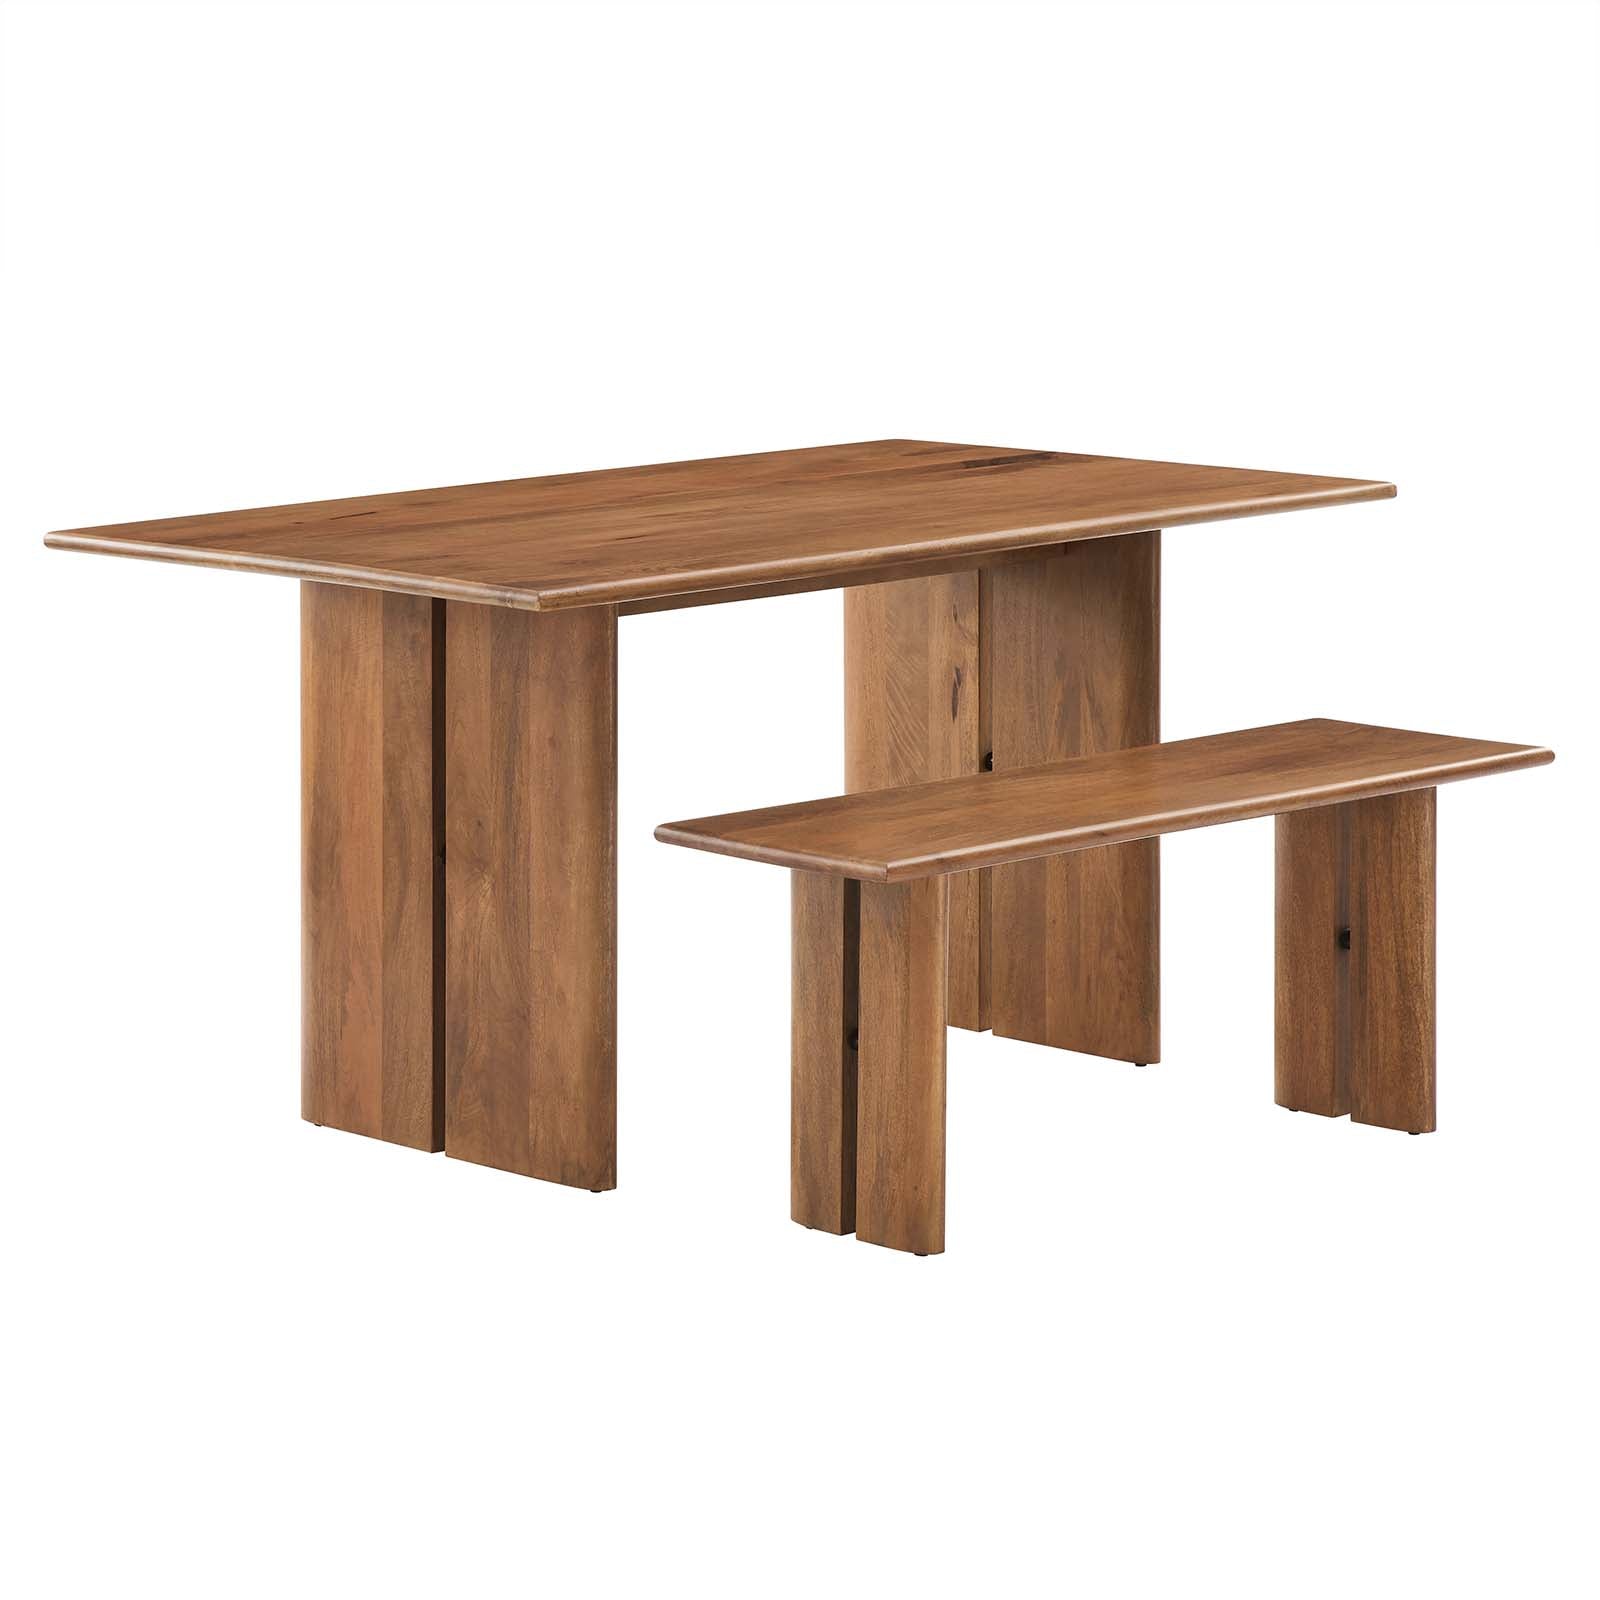 Amistad 60" Wood Dining Table and Bench Set - East Shore Modern Home Furnishings